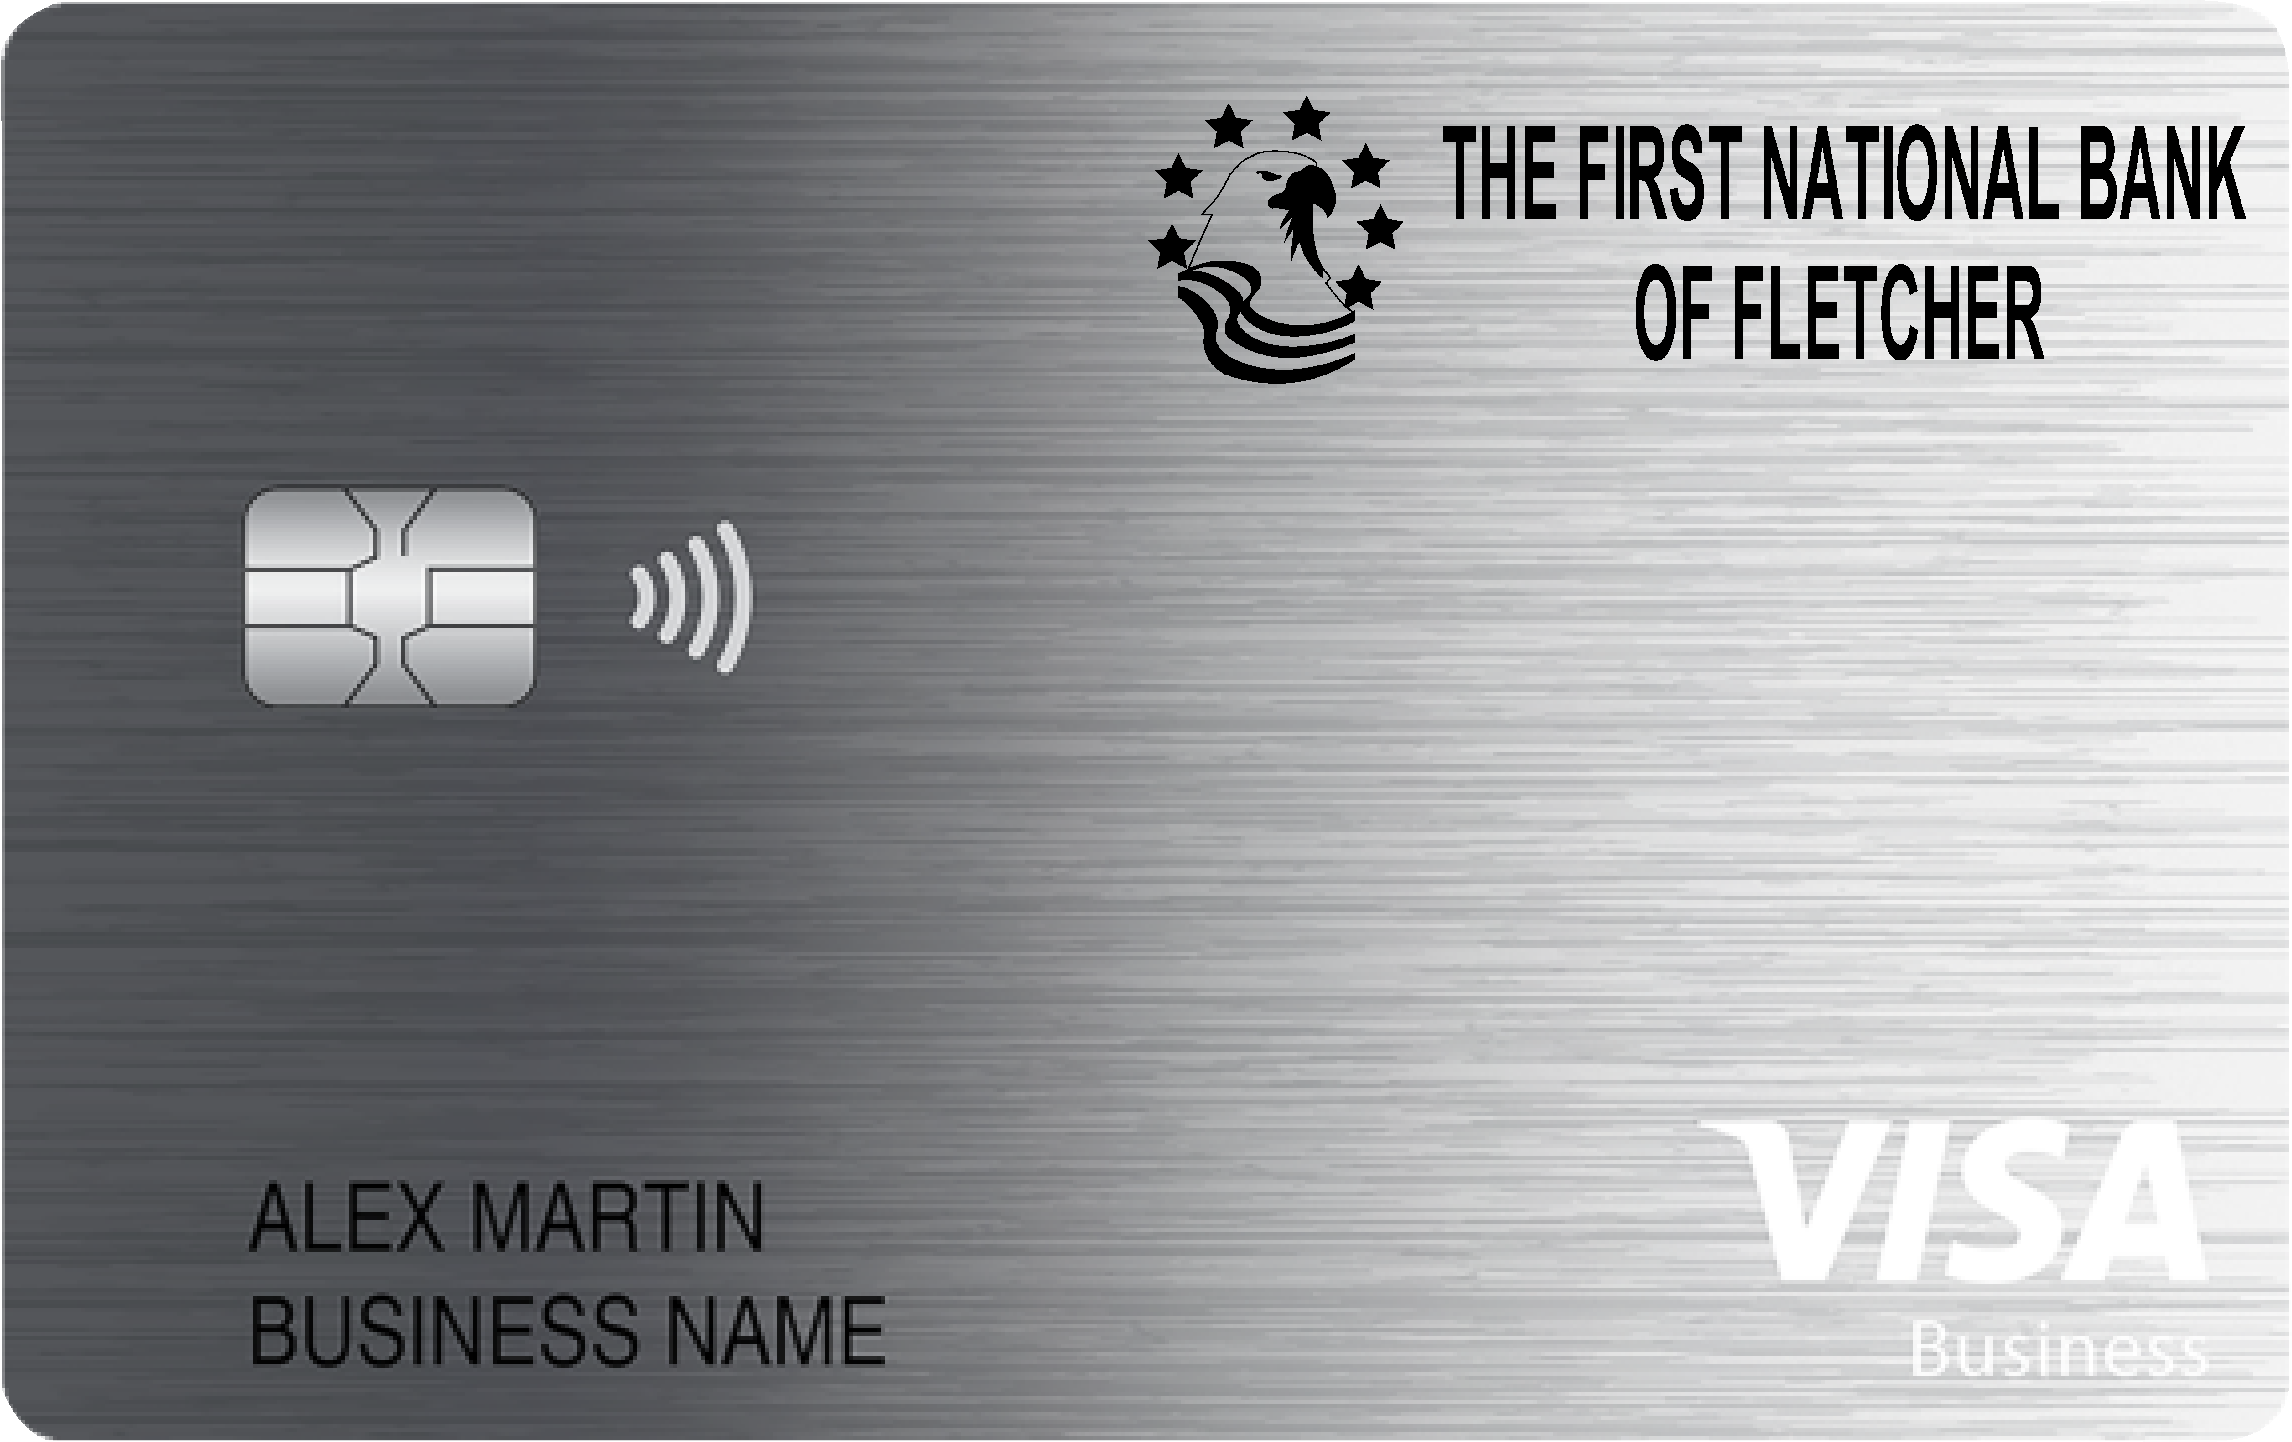 The First National Bank of Fletcher Business Cash Preferred Card